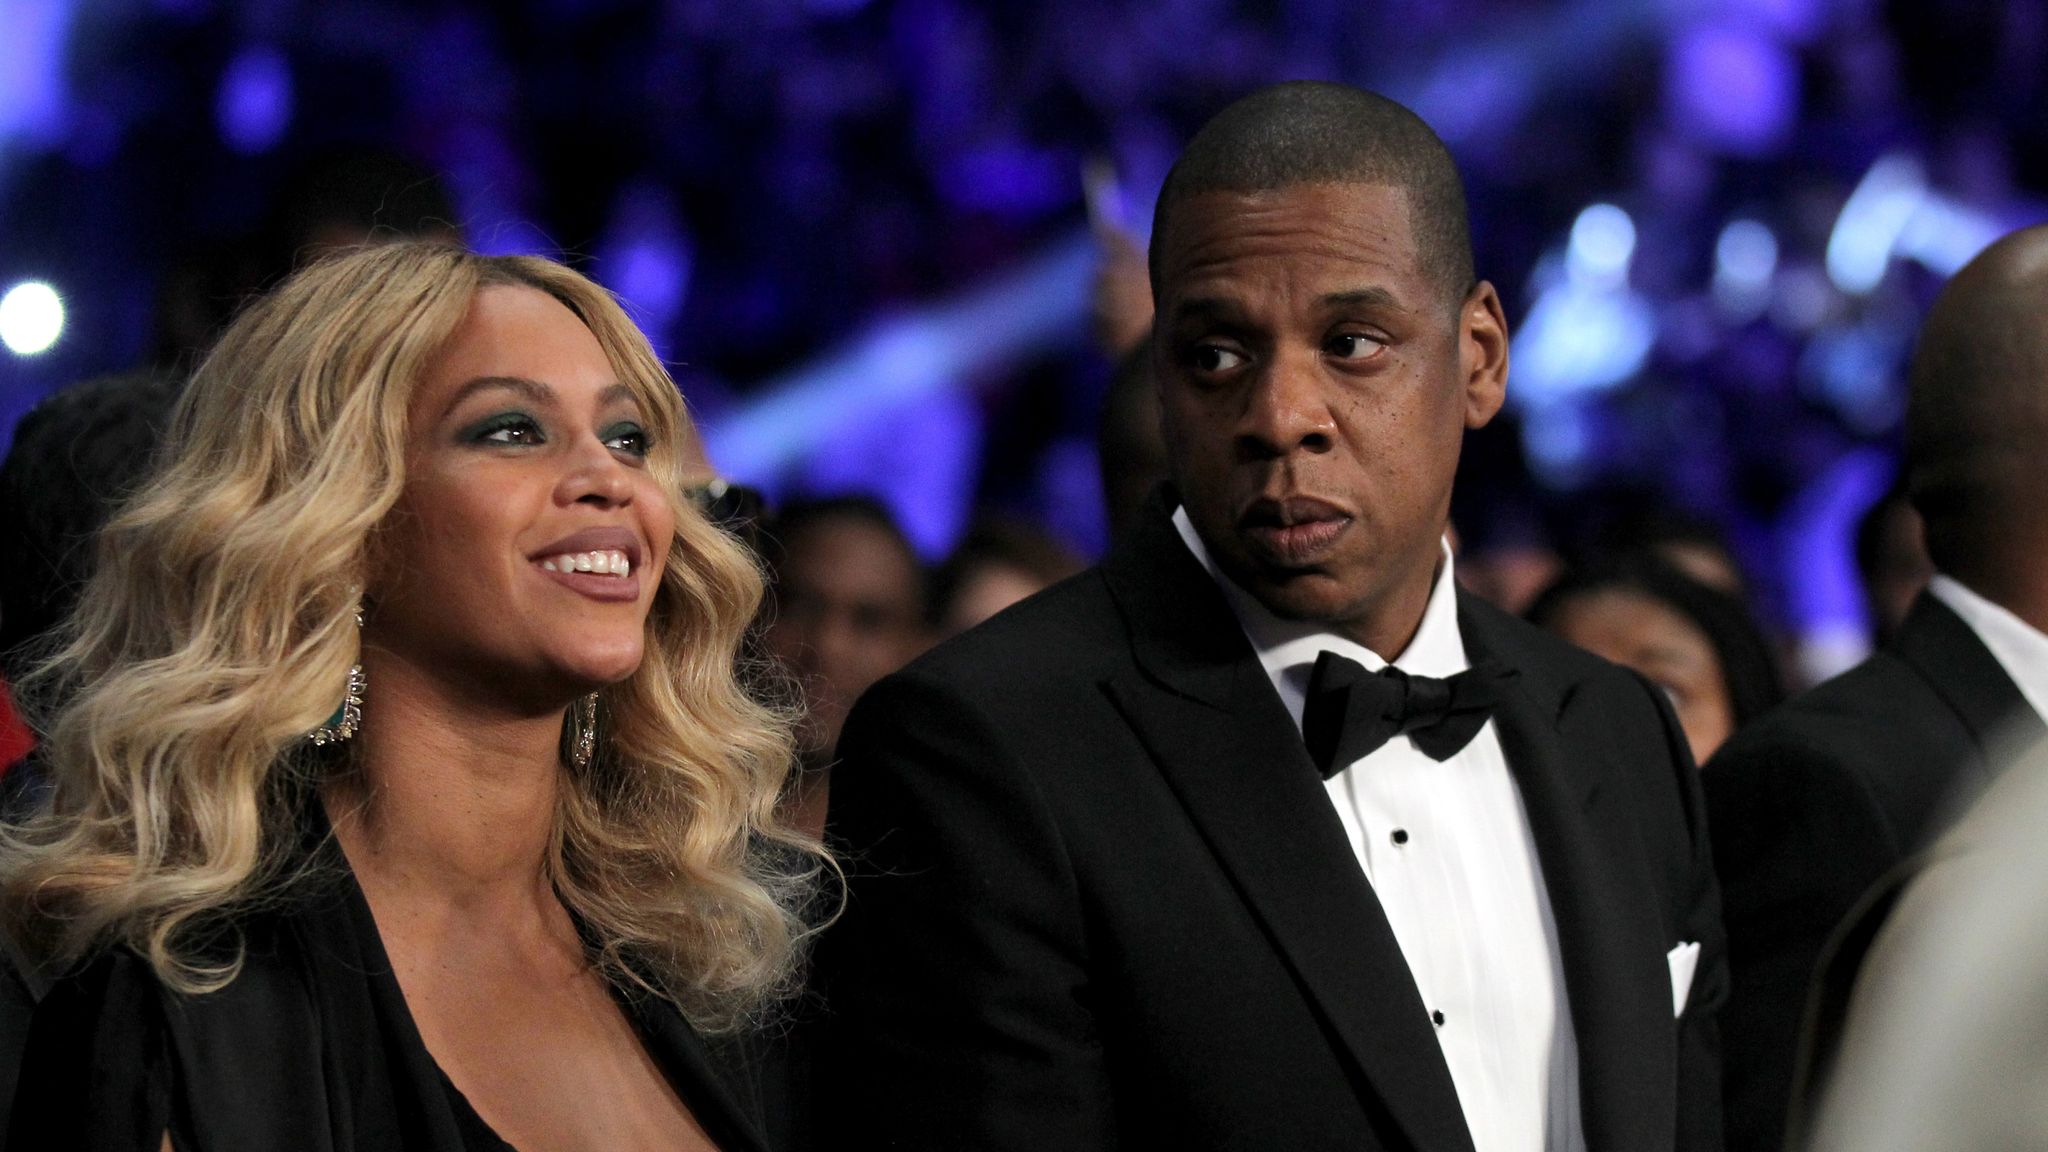 Jay-Z opens up on Beyonce and 'infidelity' | Ents & Arts News | Sky News